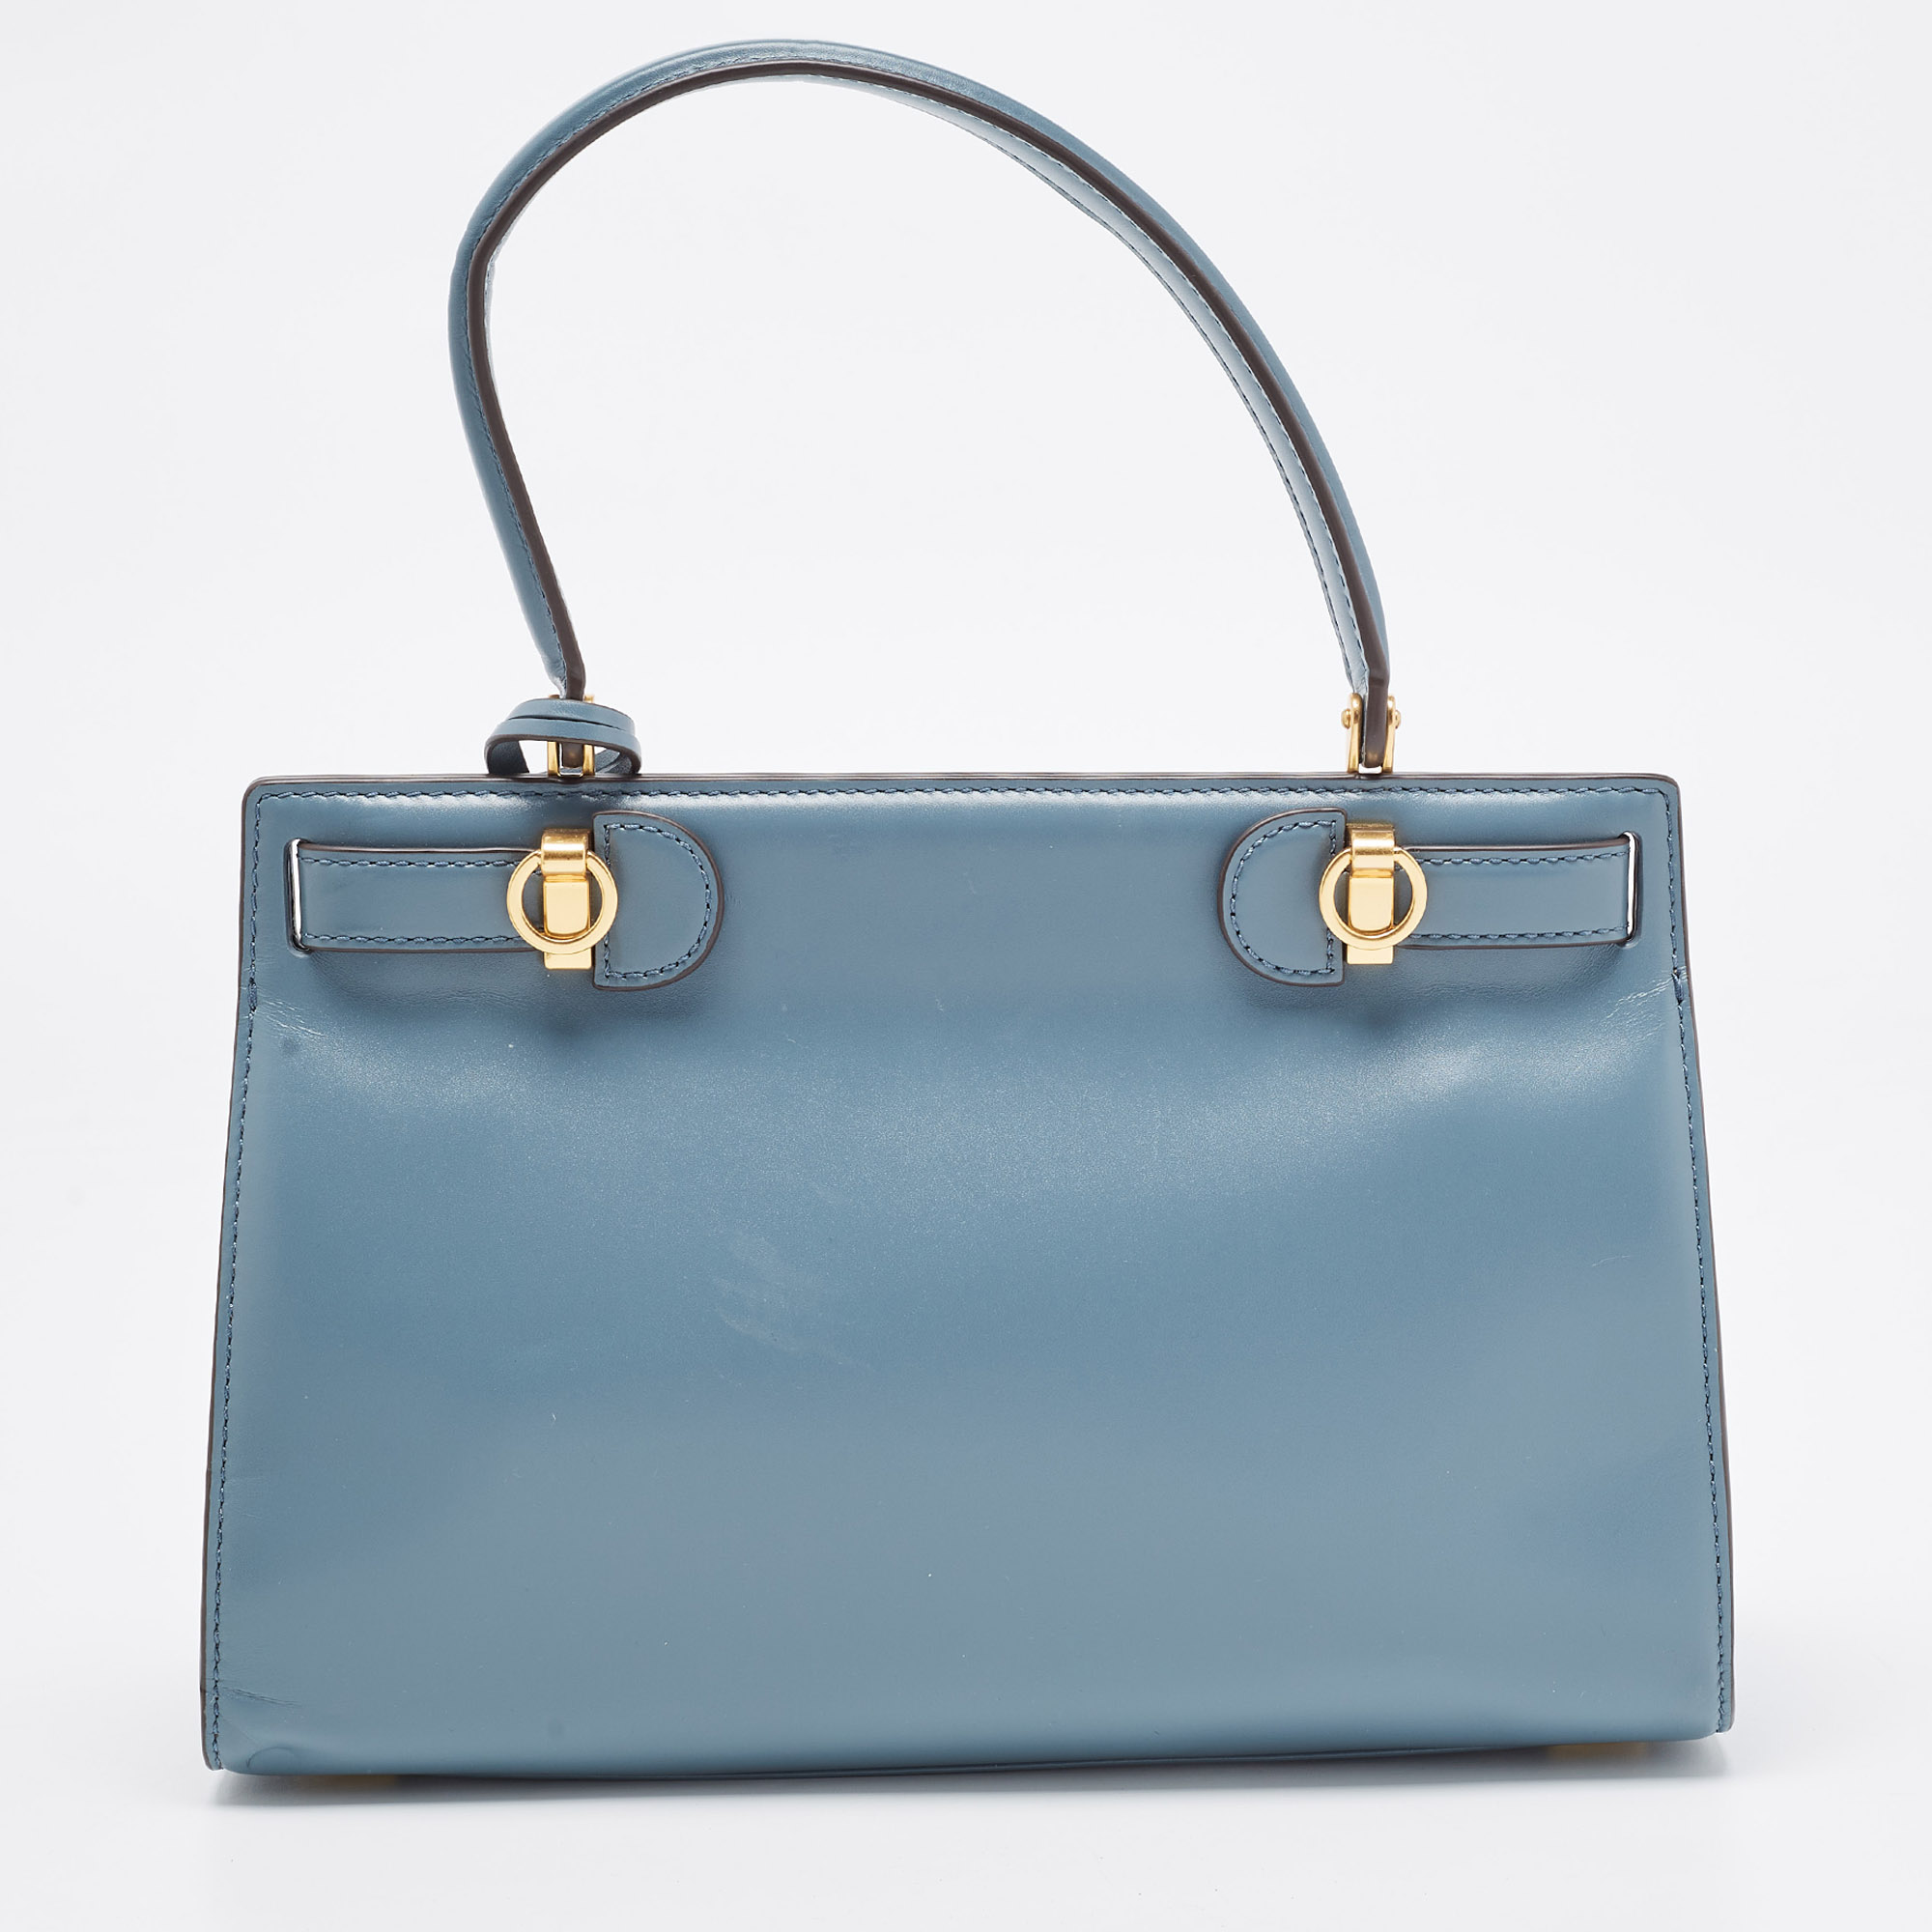 Tory Burch Light Blue Leather Small Lee Radziwill Top Handle Bag